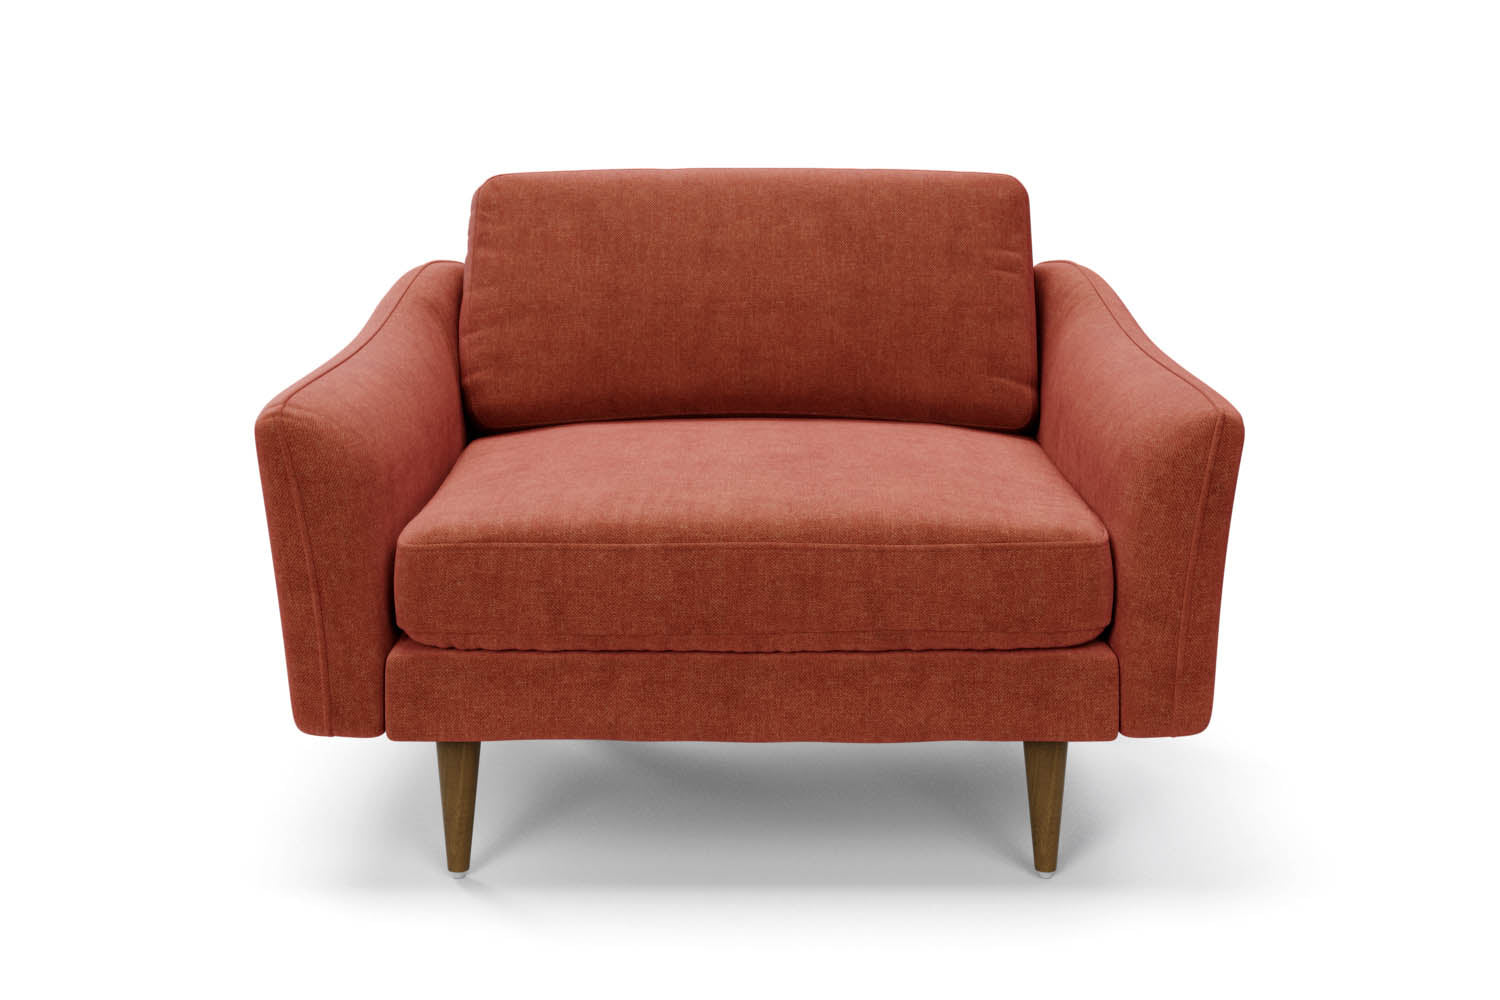 The Rebel Snuggler Sofa in Spice with brown legs front variant_40886275899440